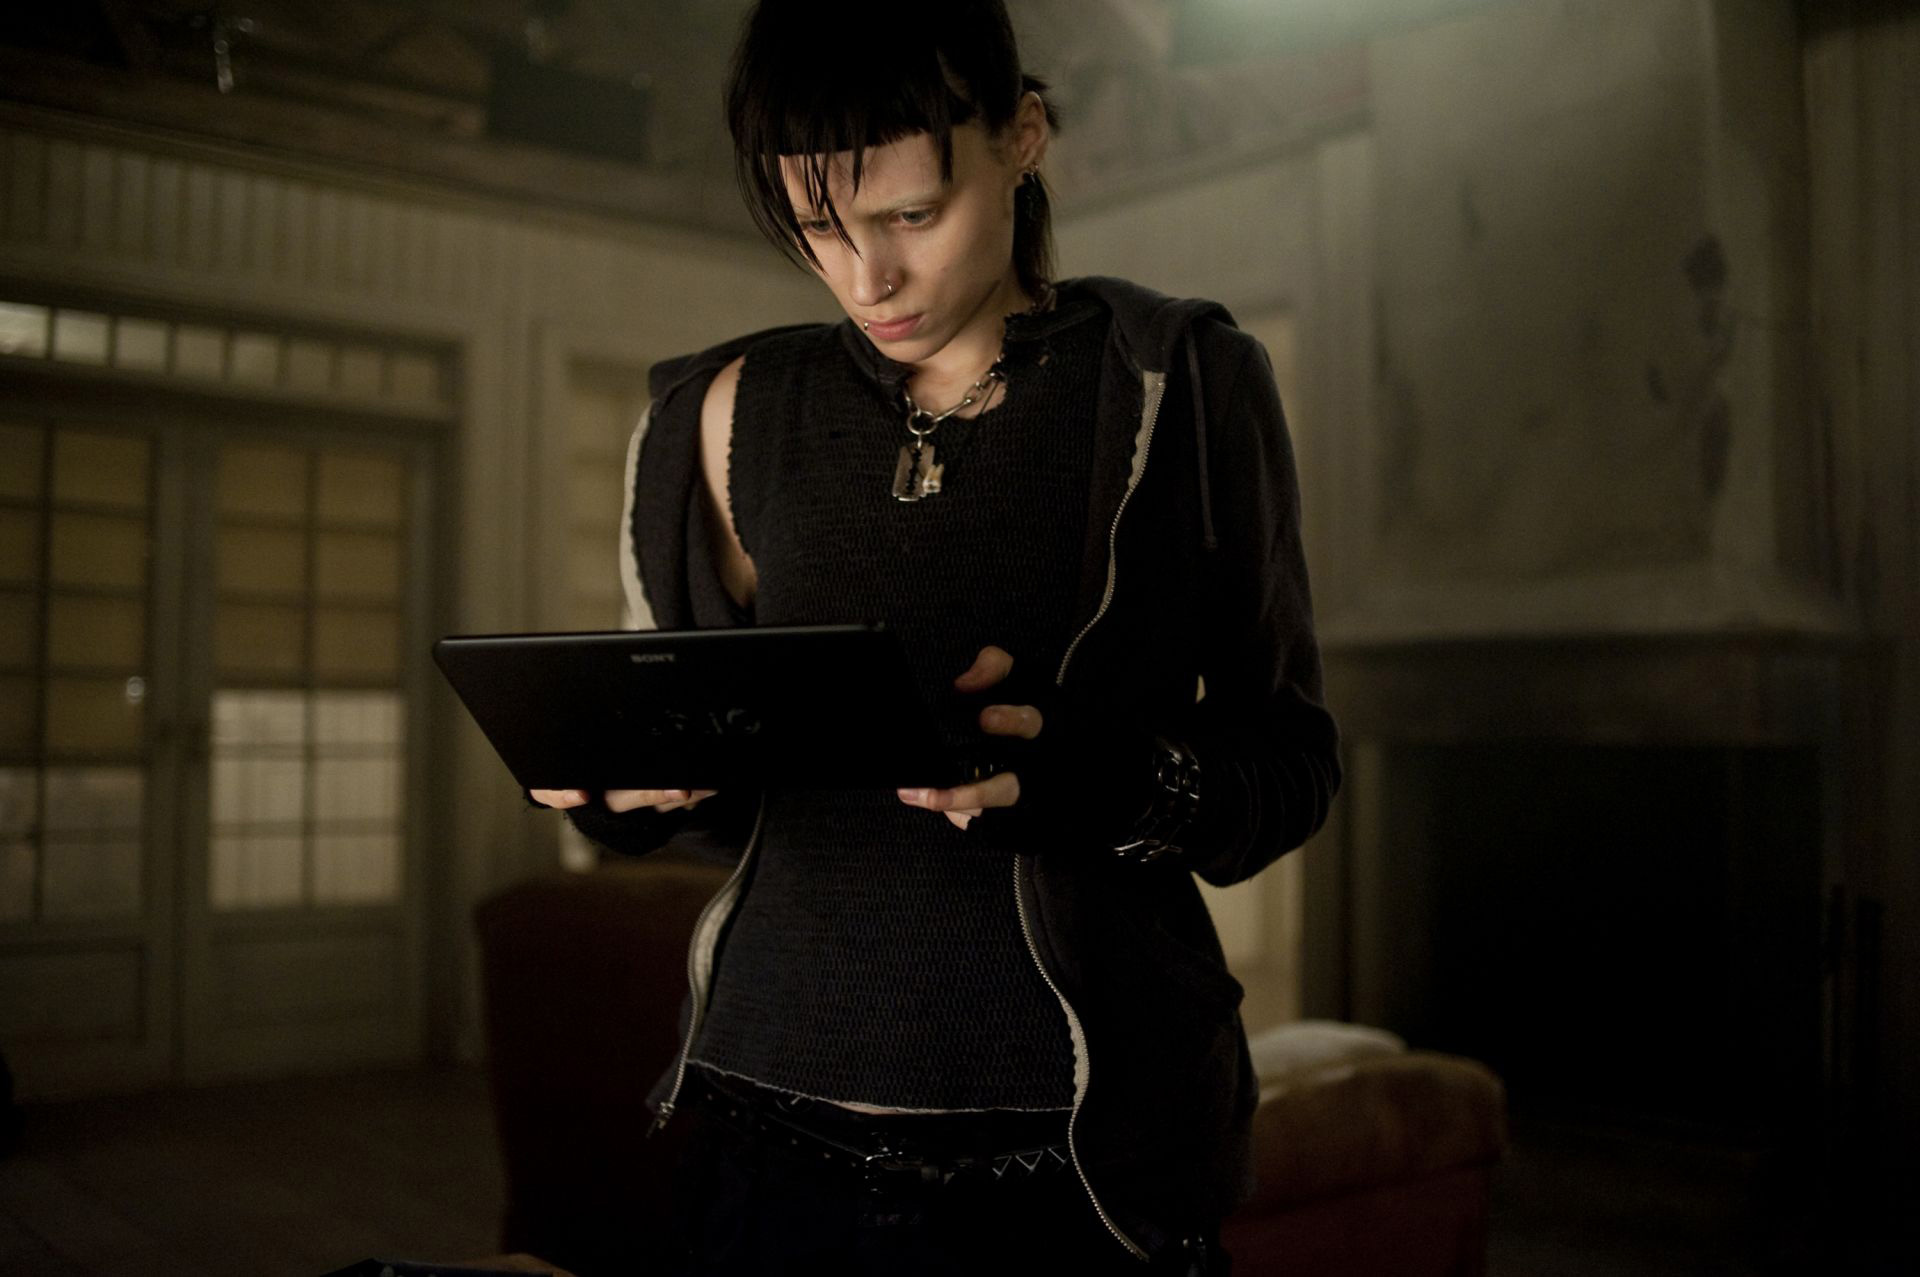 Nice wallpapers The Girl With The Dragon Tattoo 1920x1277px